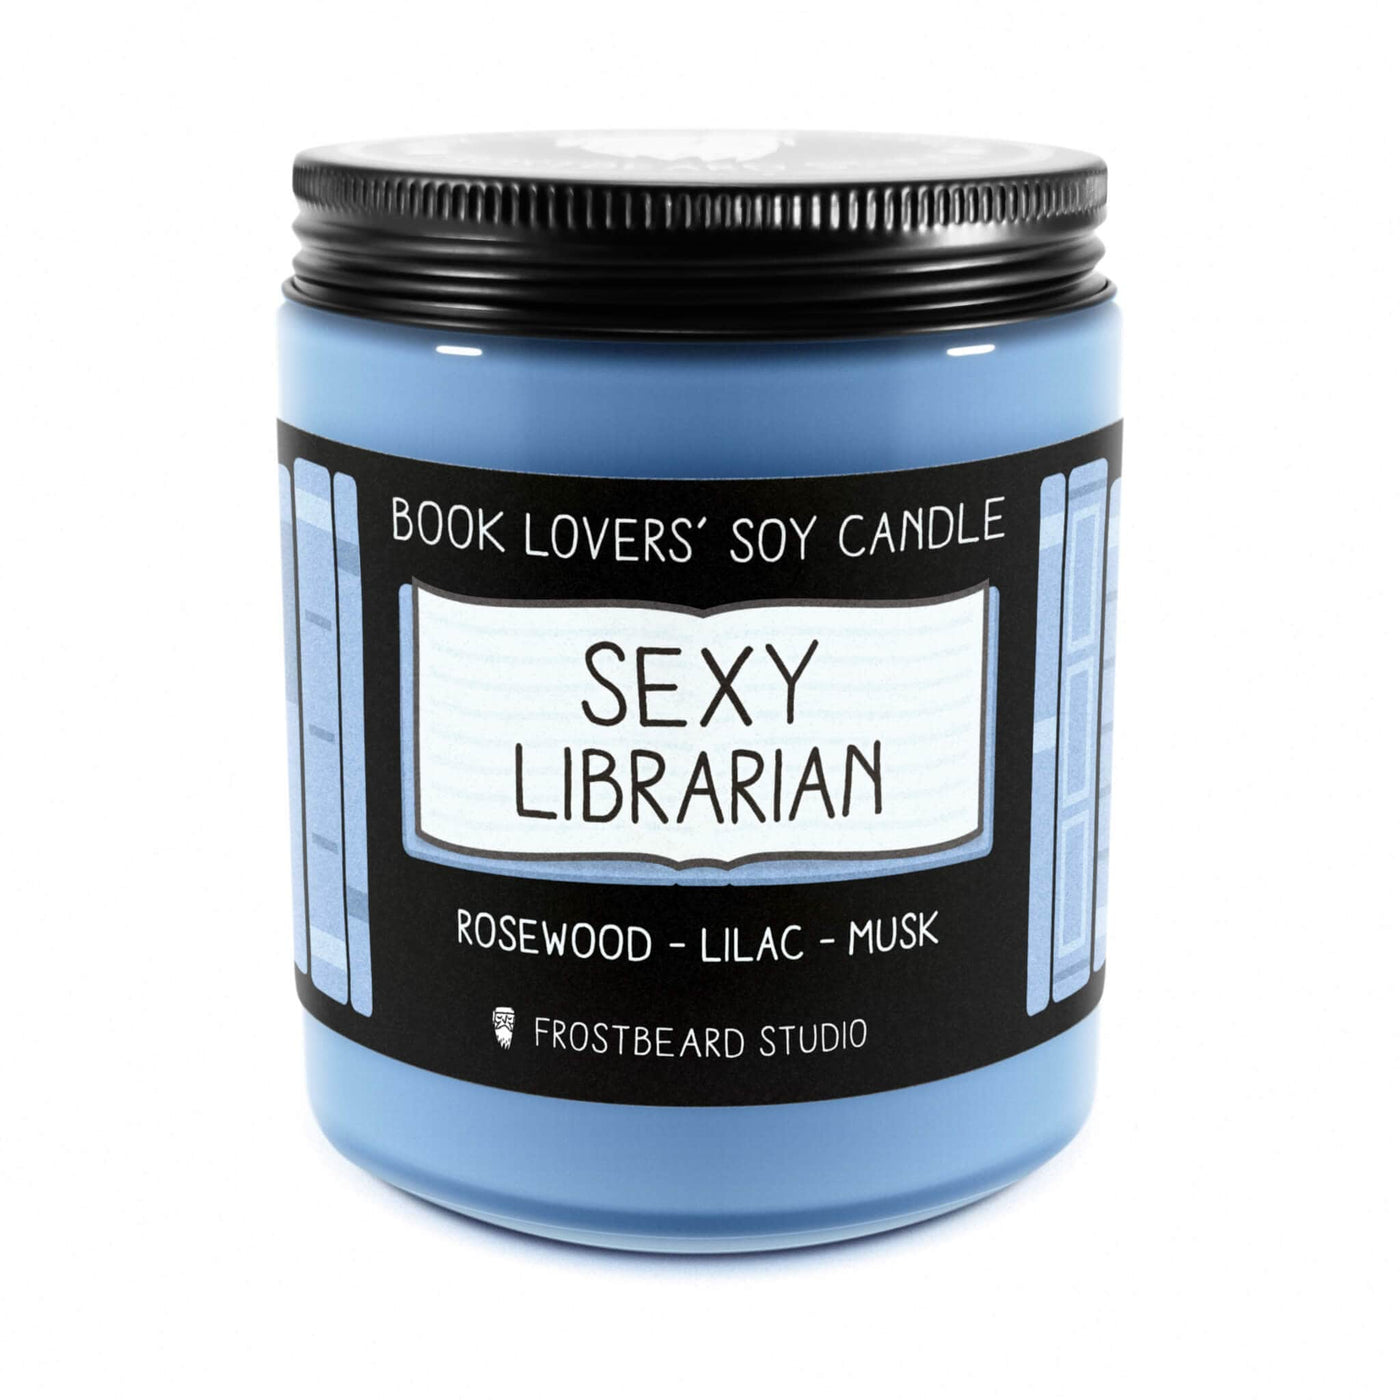 Sexy Librarian - 8 oz Jar - Book Lovers' Soy Candle - Frostbeard Studio